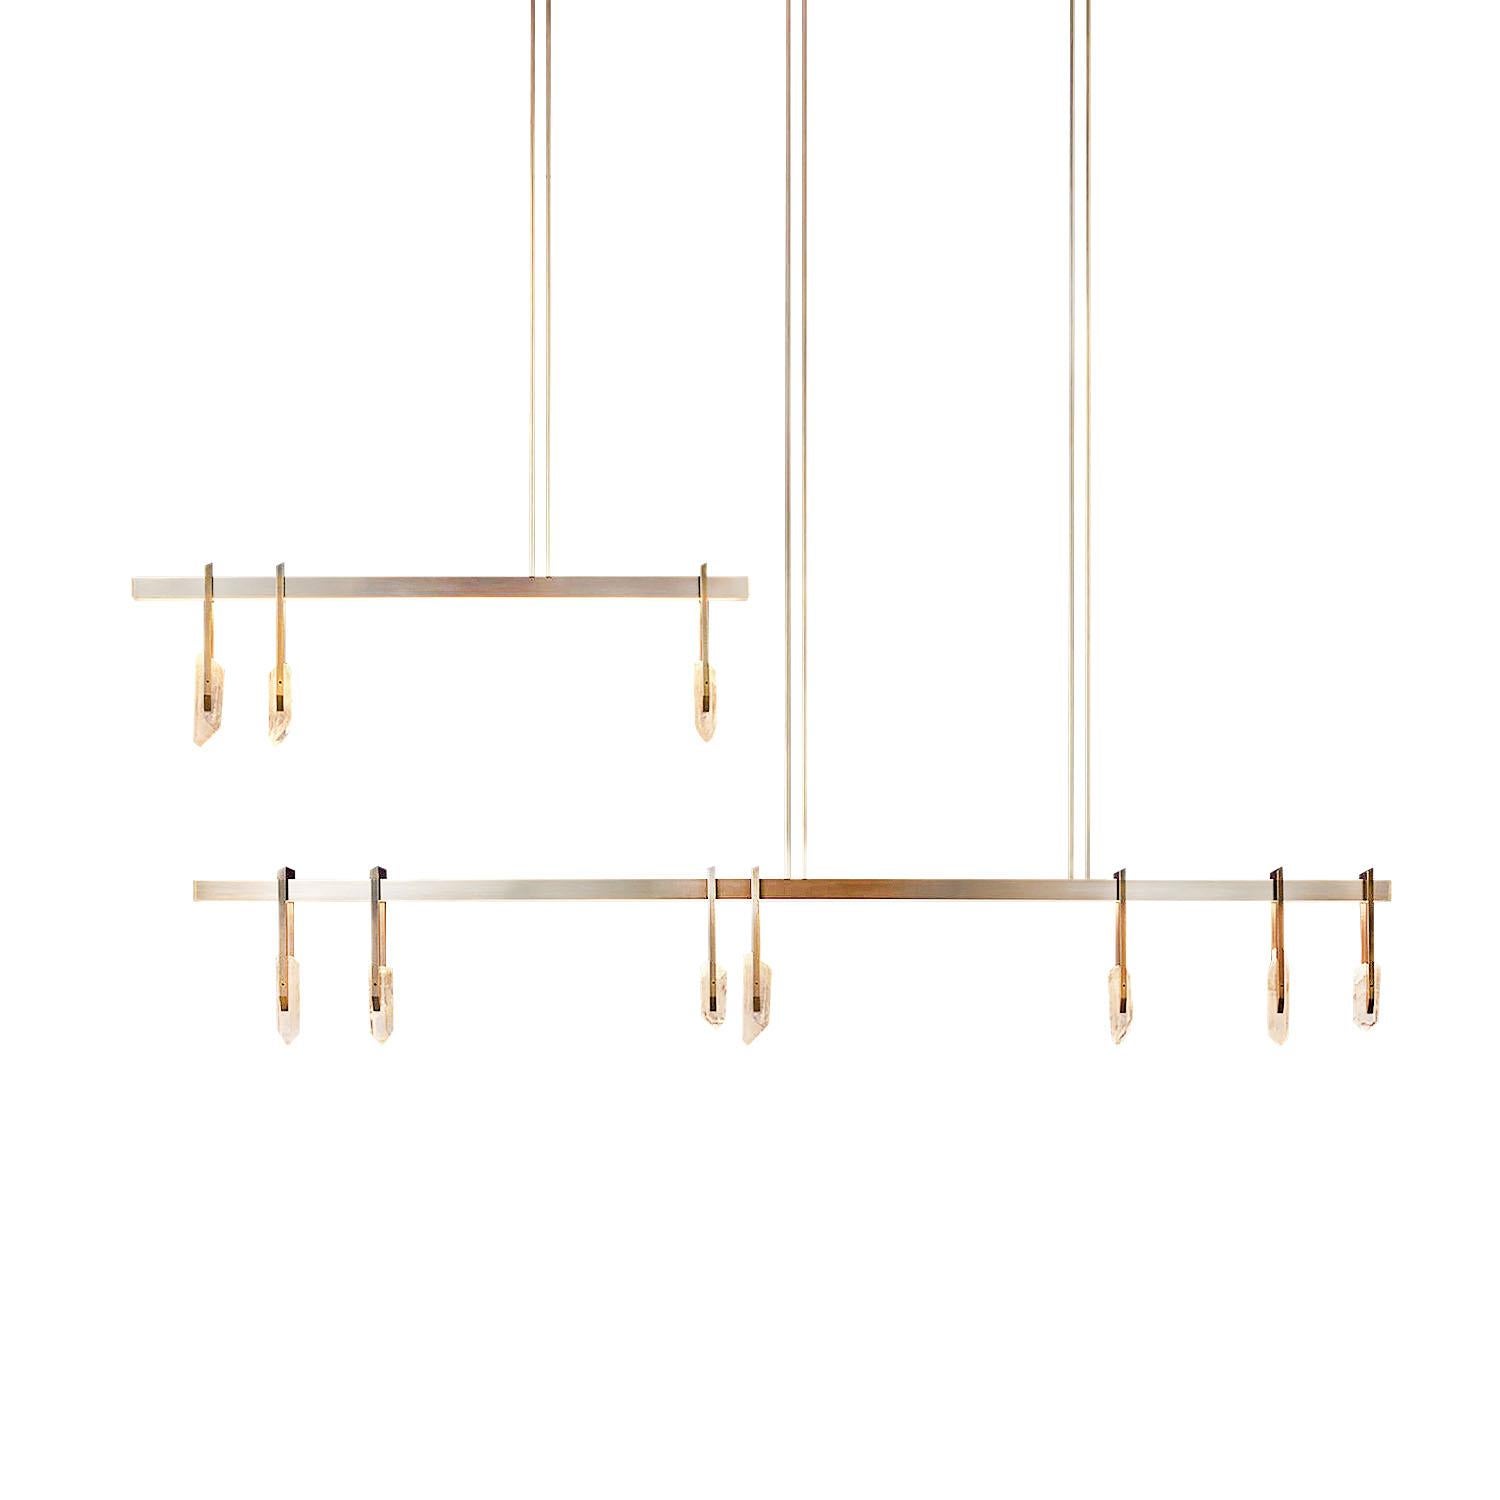 Brass and quartz crystal pendant light - Abacus 1800 by Christopher Boots

The Abacus is a sophisticated tool dating back to 300 BC.
Sliding stones along a rod, ancient statesmen, merchants and mathematicians performed mathematical balancing acts